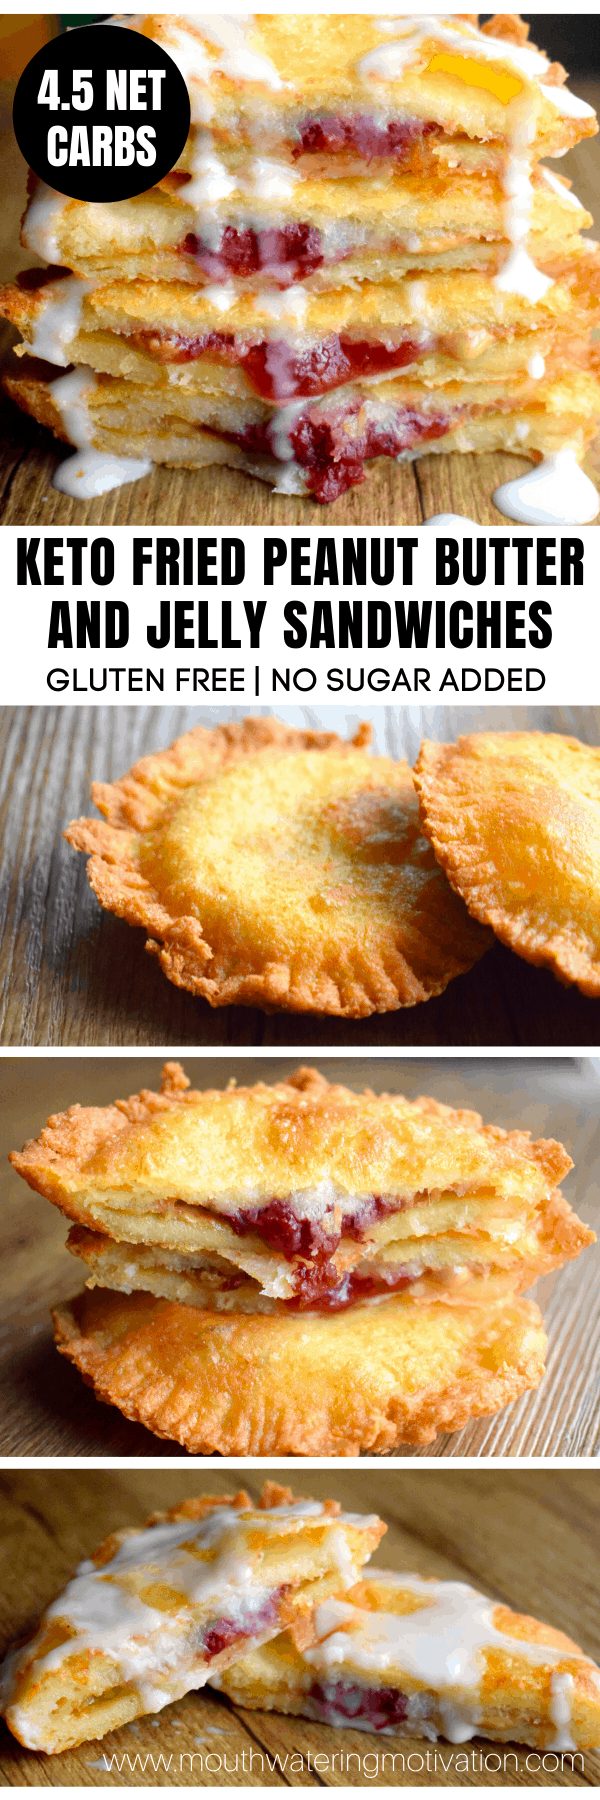 keto fried peanut butter and jelly sandwiches